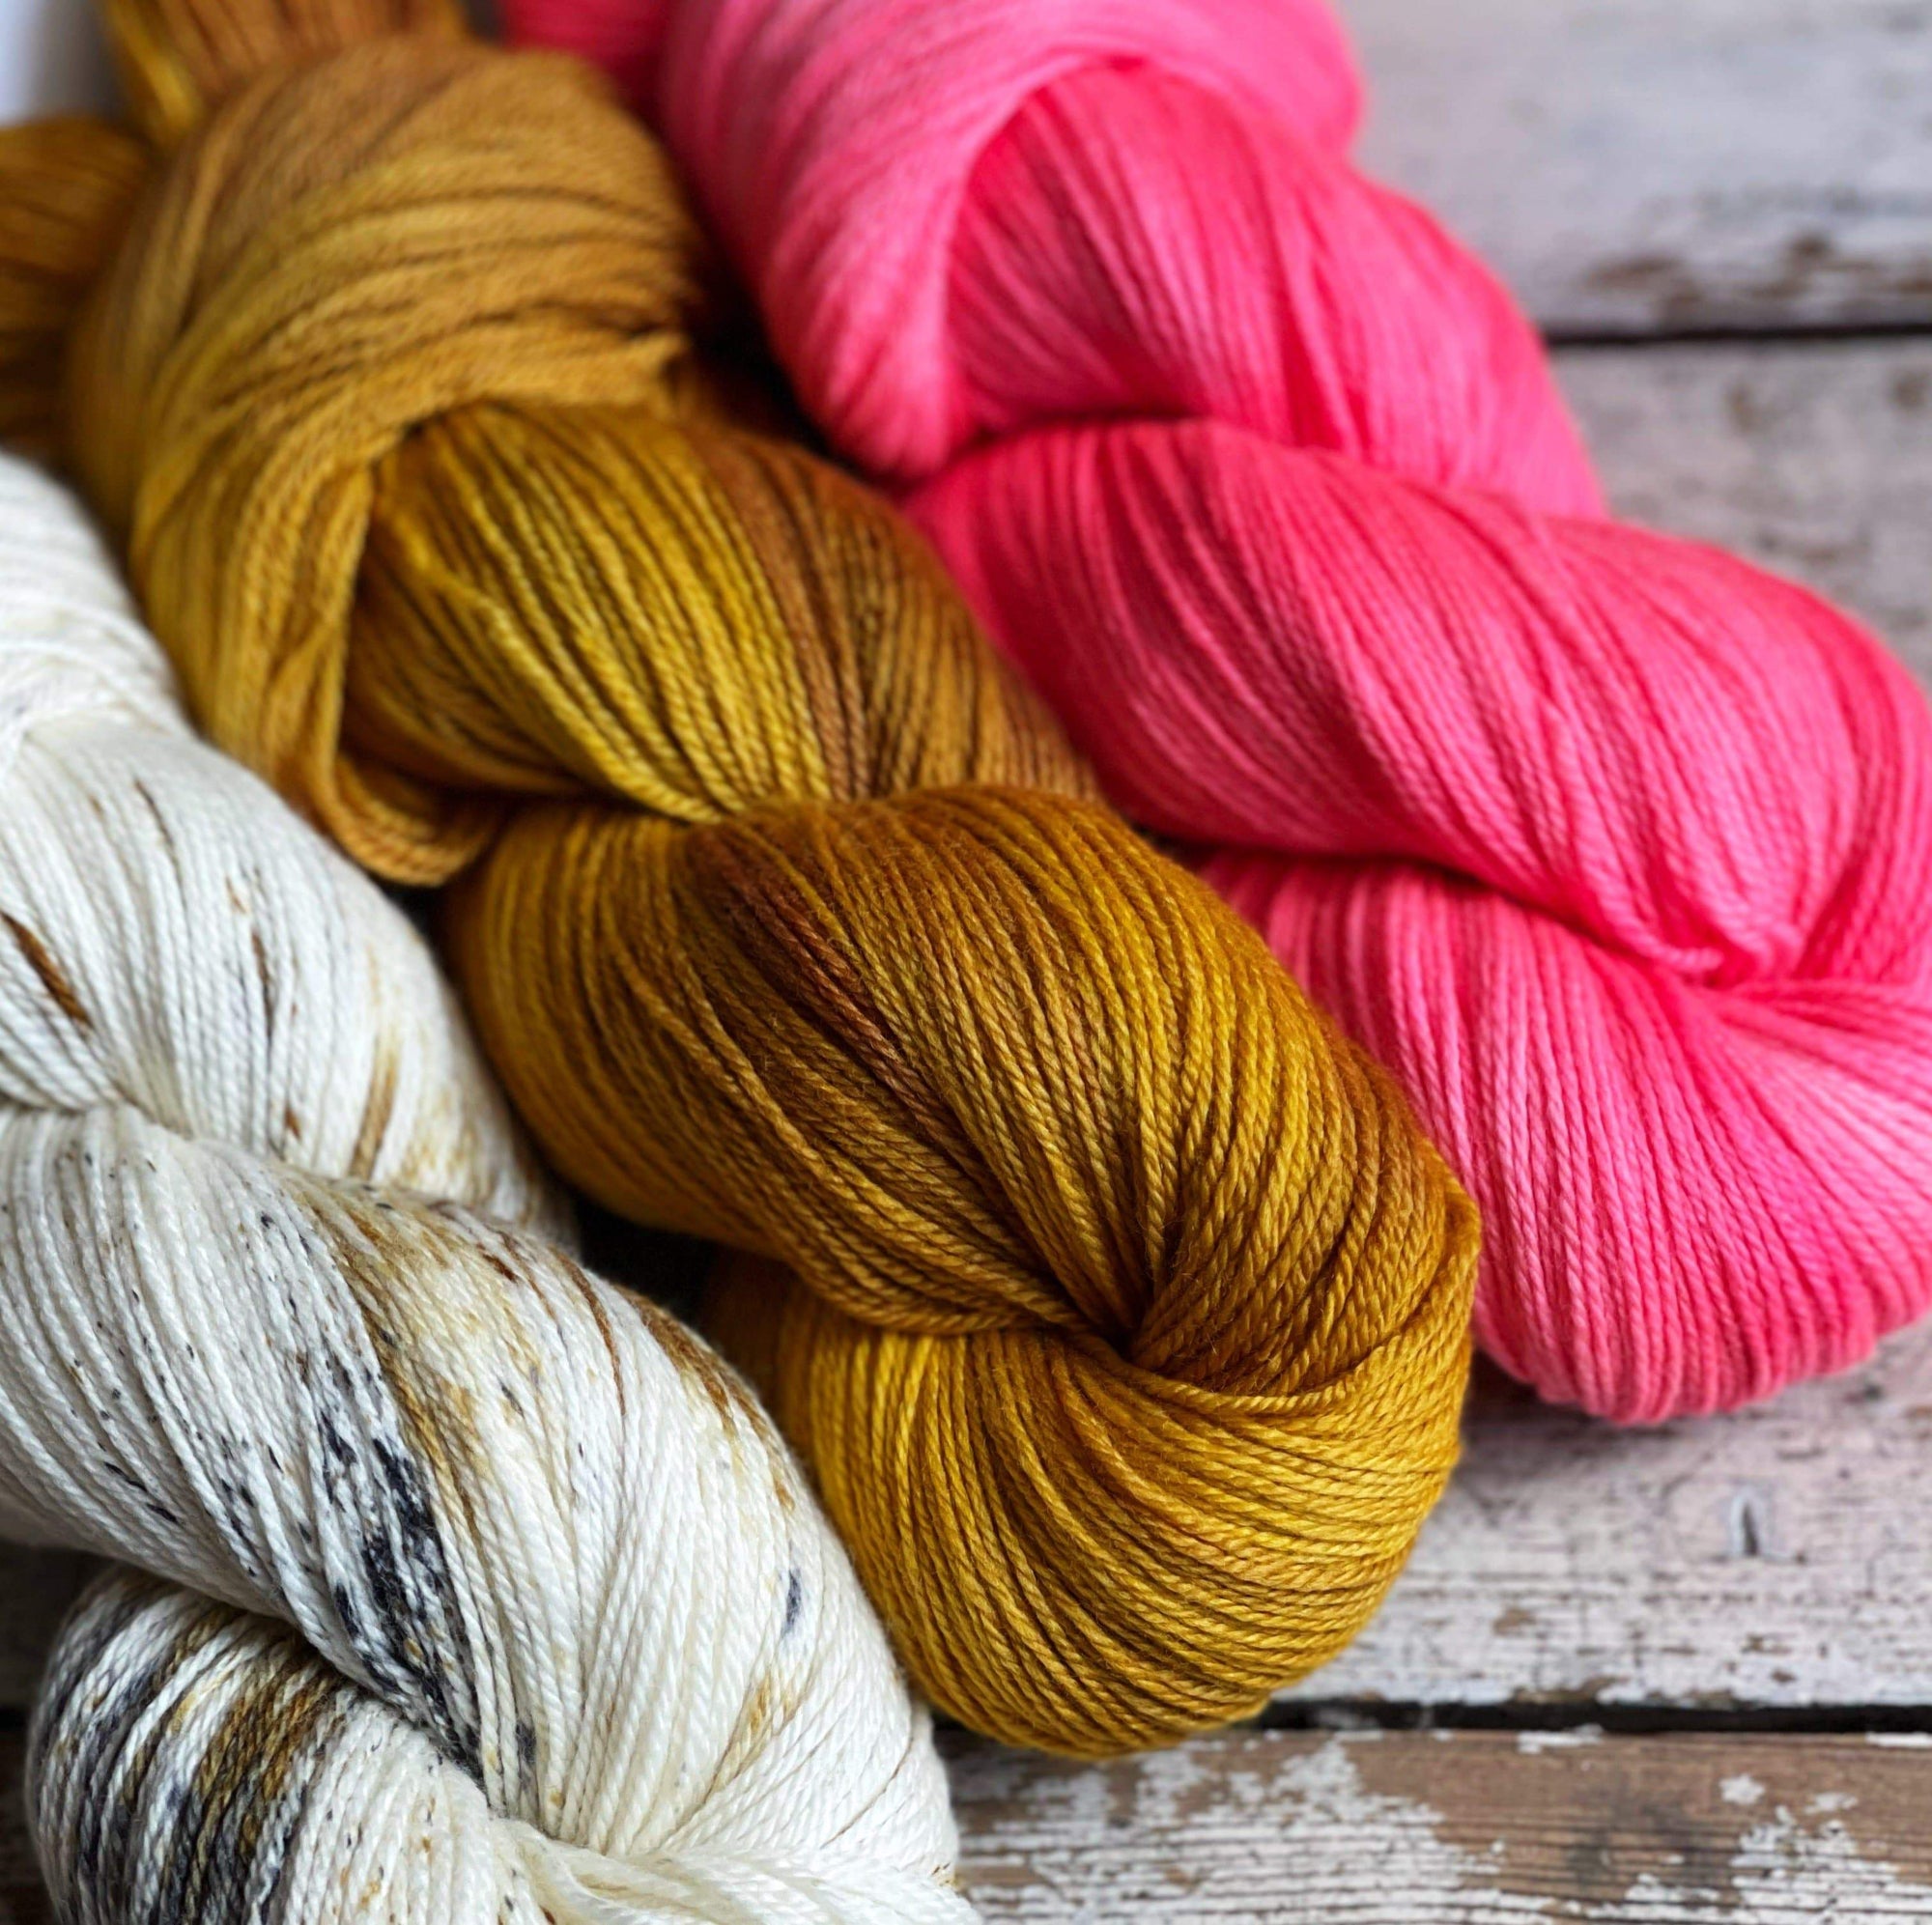 Polina KAL Yarn Recommendations